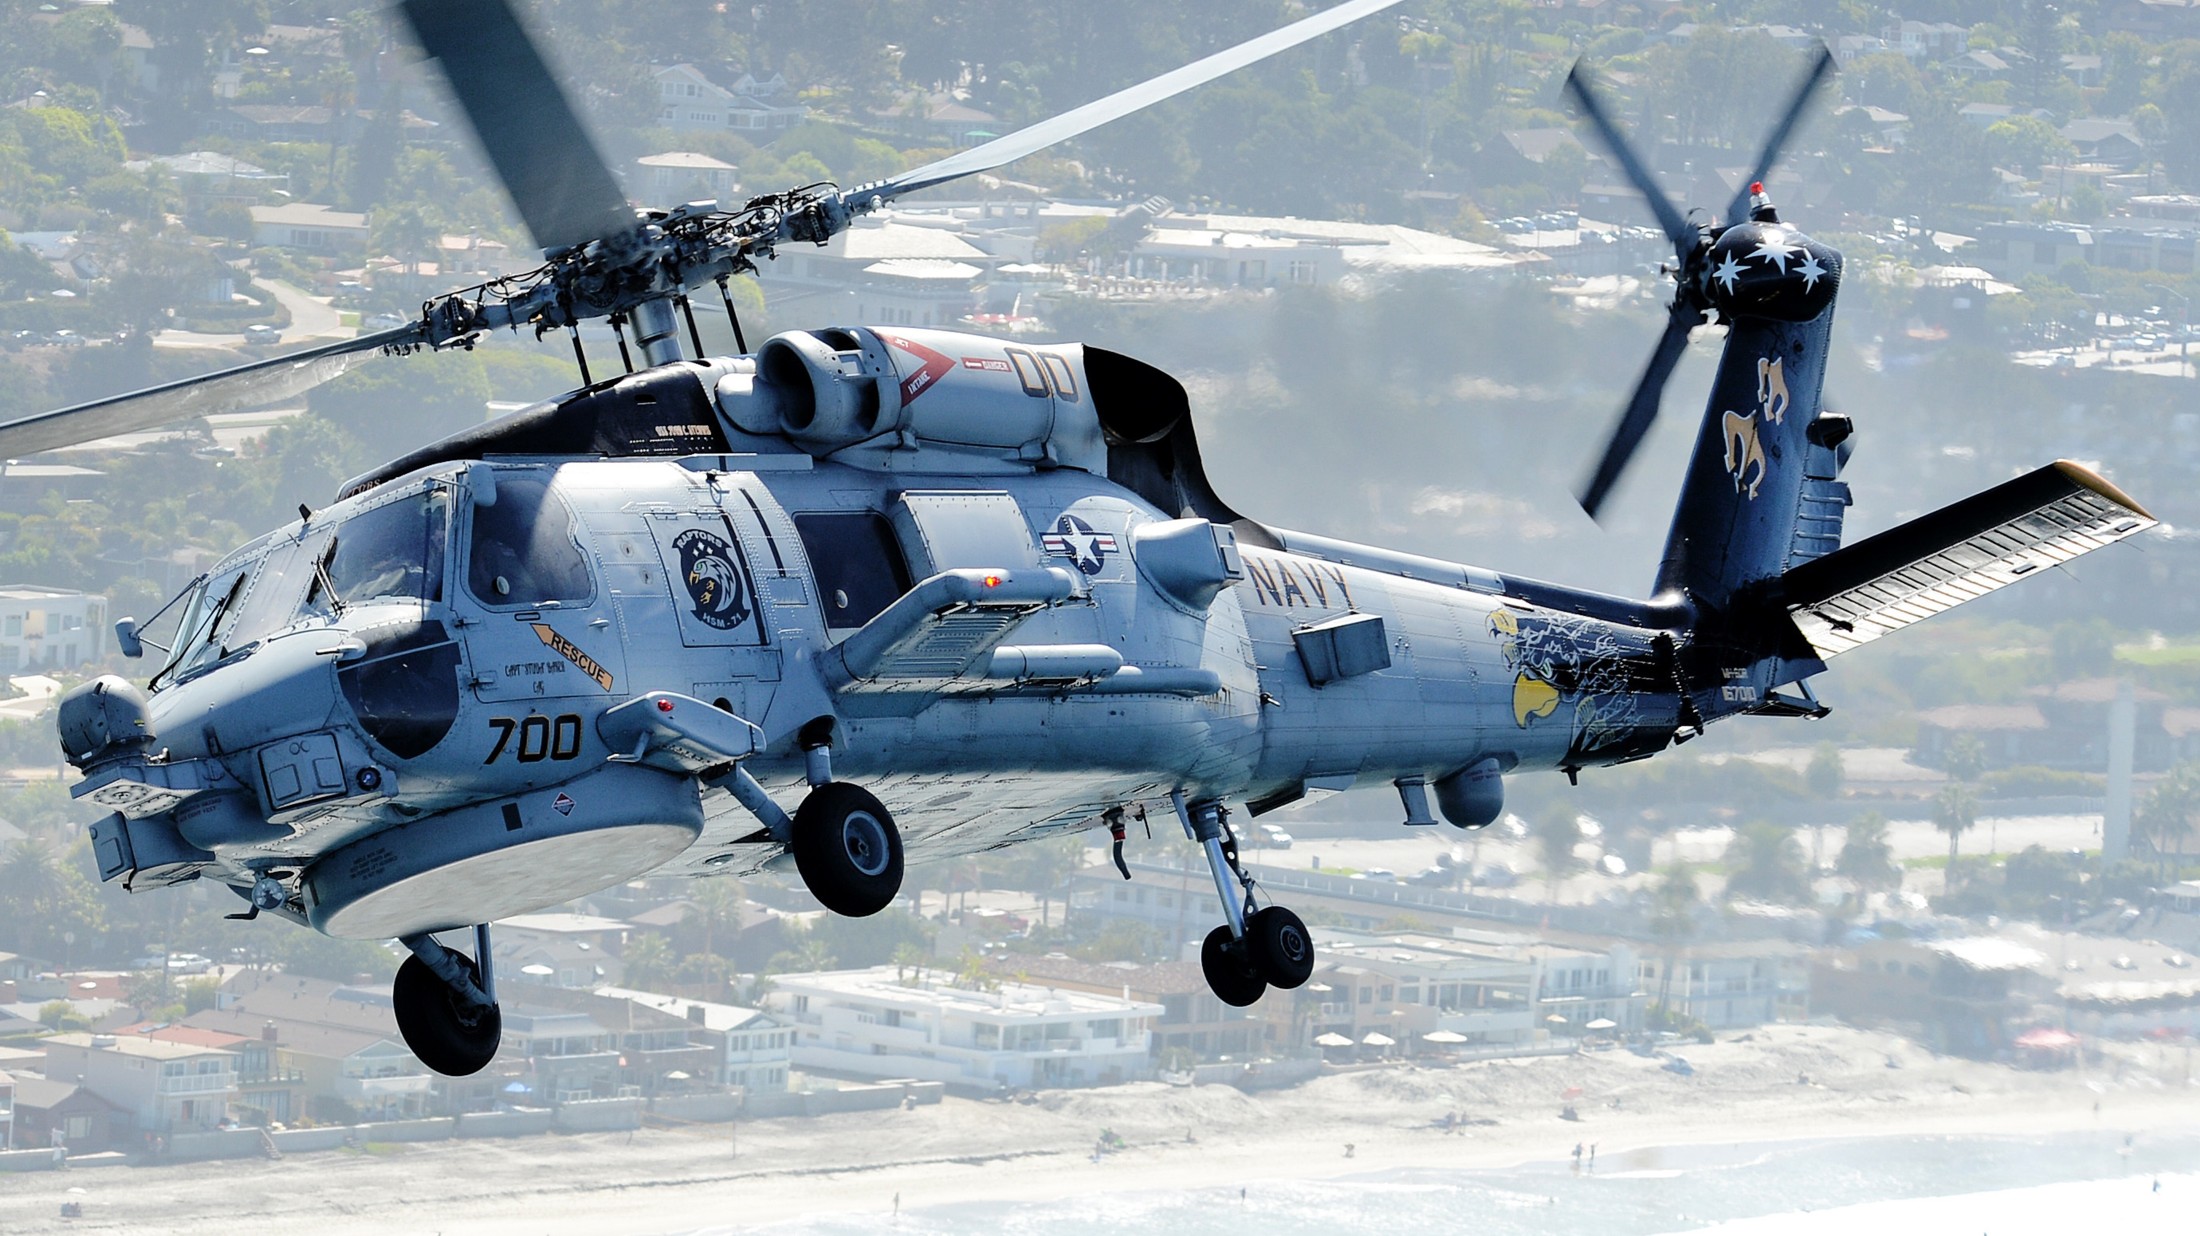 hsm-71 raptors helicopter maritime strike squadron mh-60r seahawk navy 2014 55